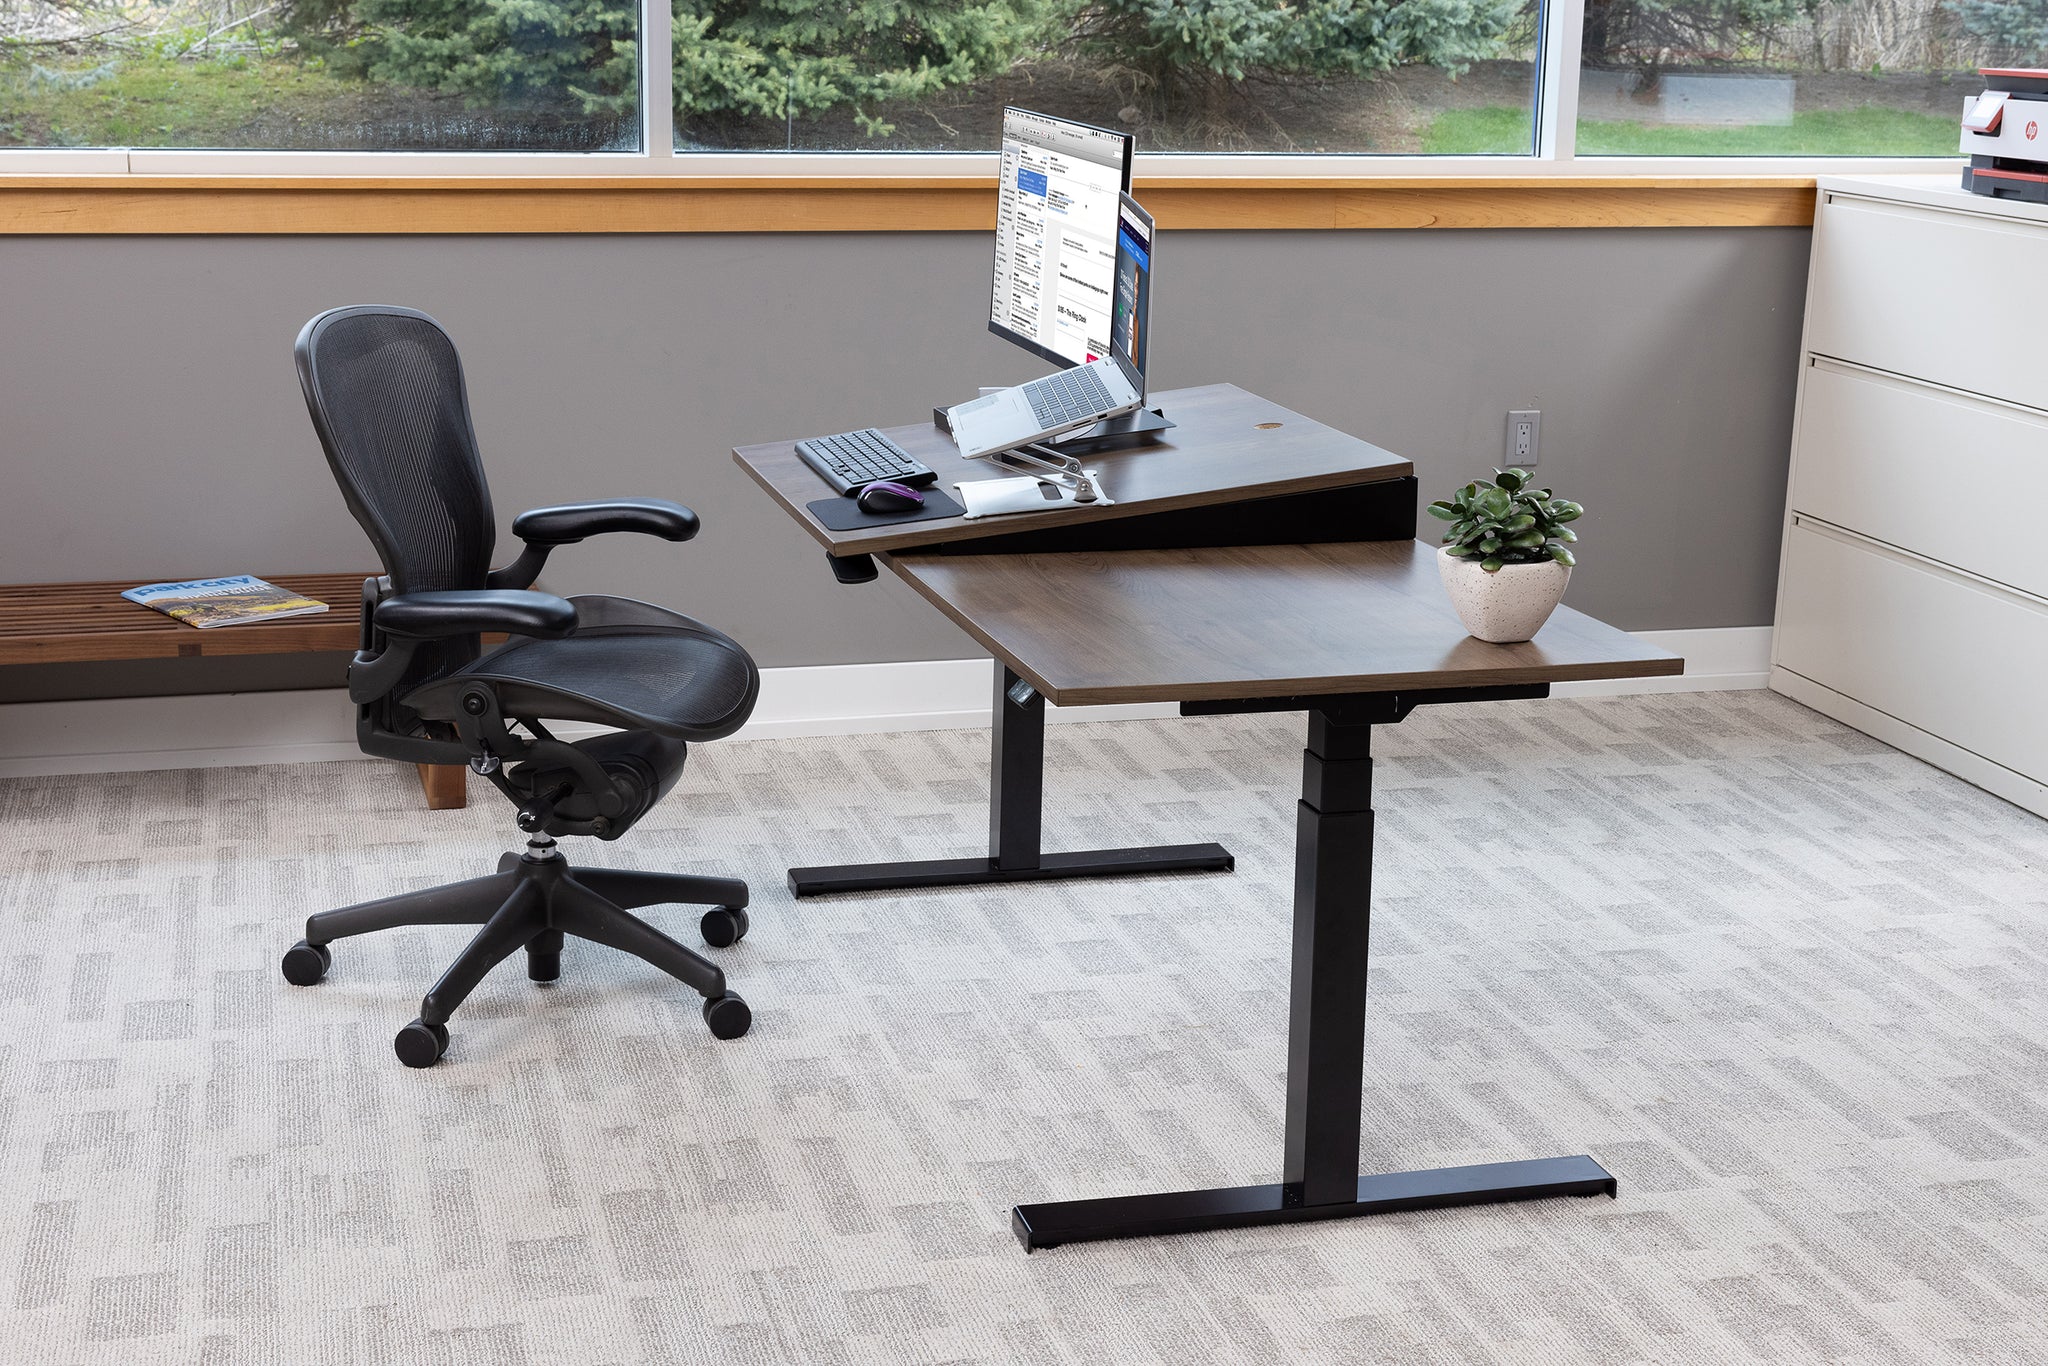 Teeter Sit-Stand Desk - Adjustable Height Ergonomic Workstation with Stool, Side Table, and Foot Platform.